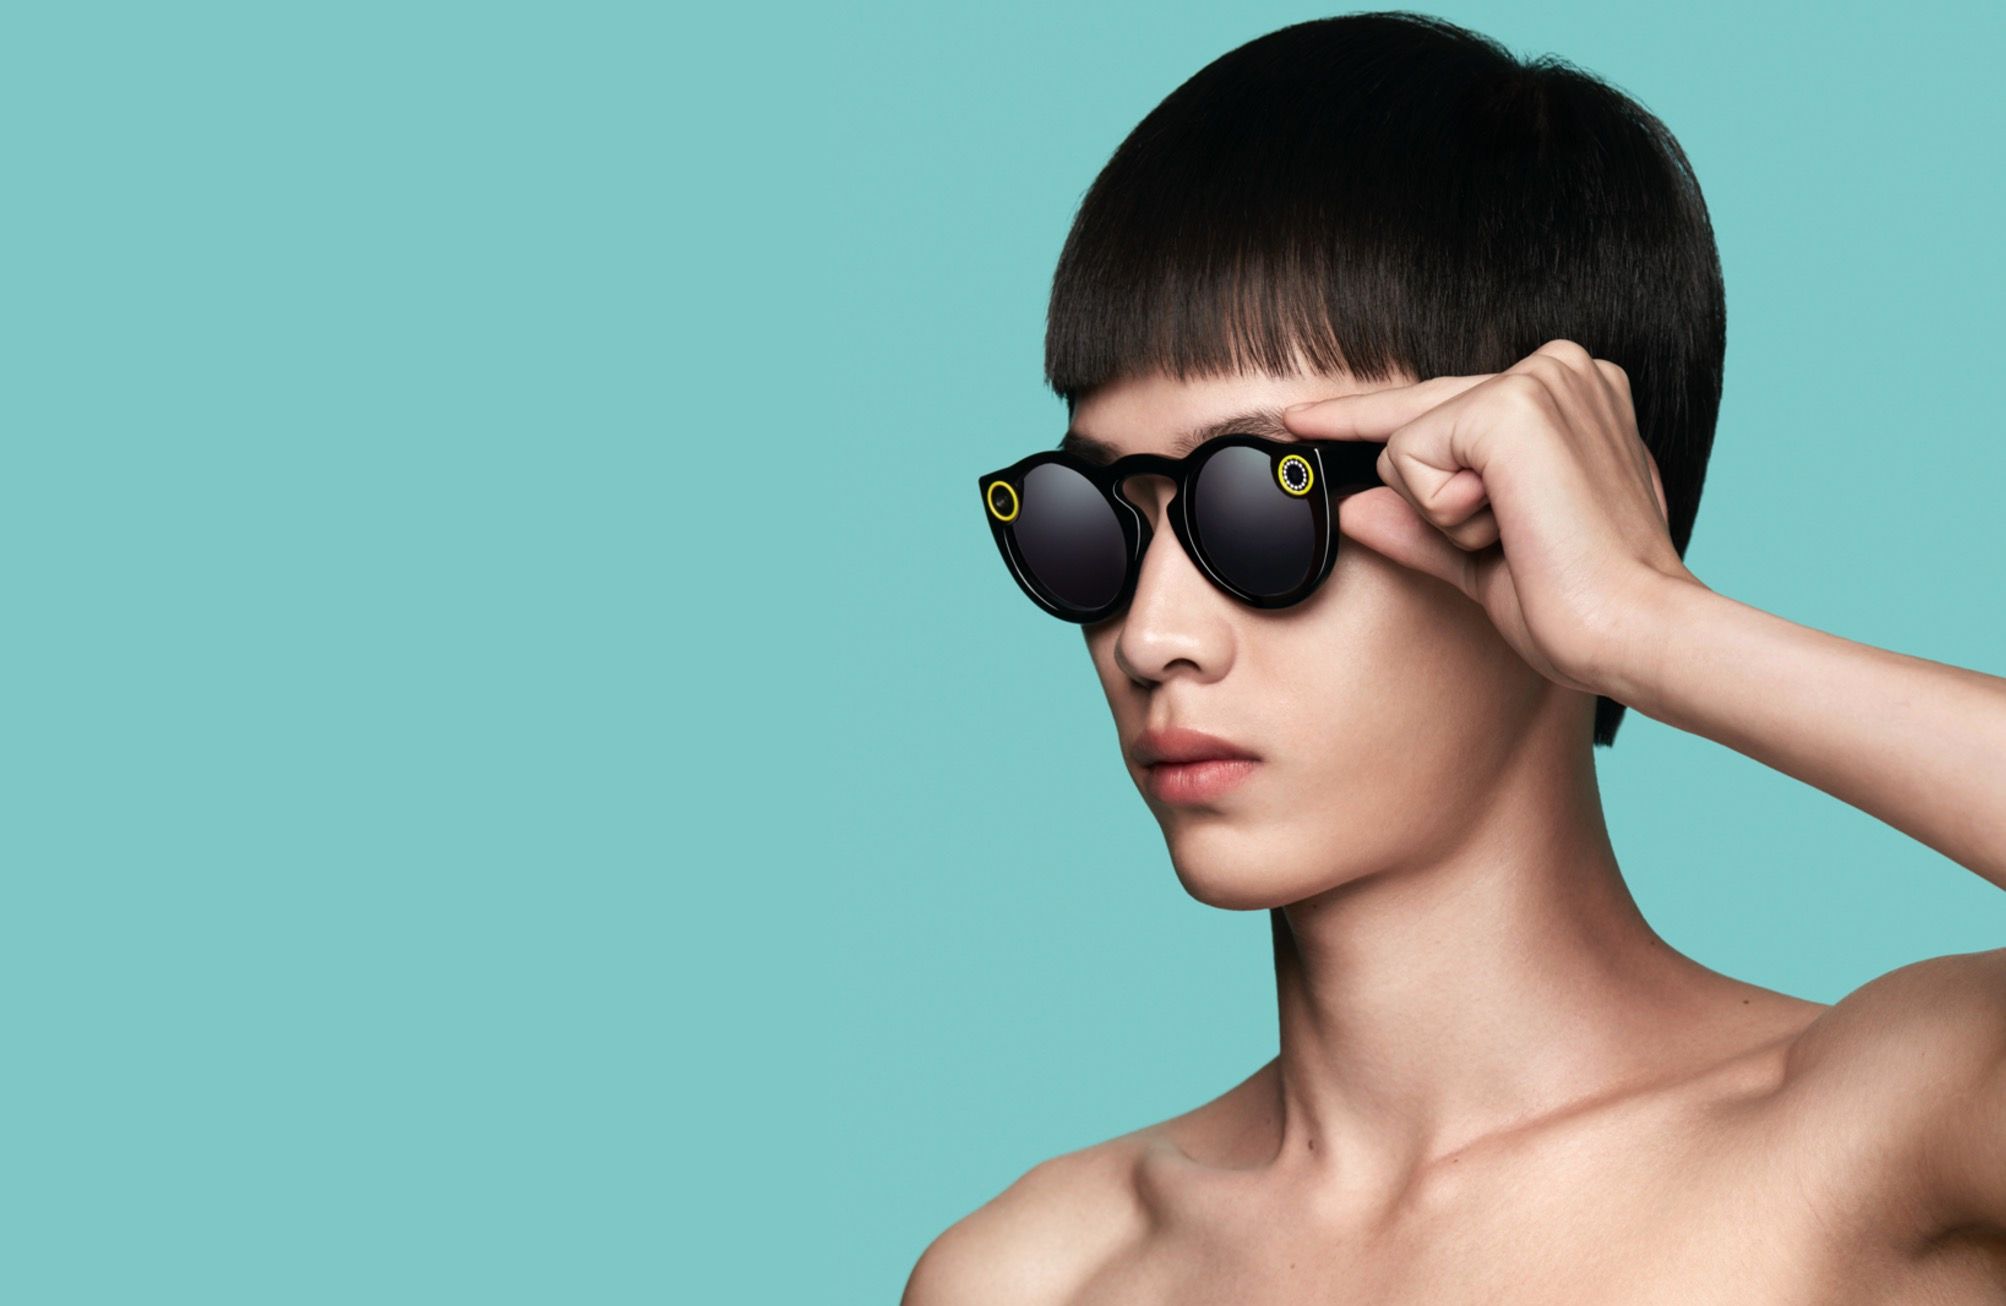 snap spectacles tips and tricks get creative with your new snapchat sunglasses image 1